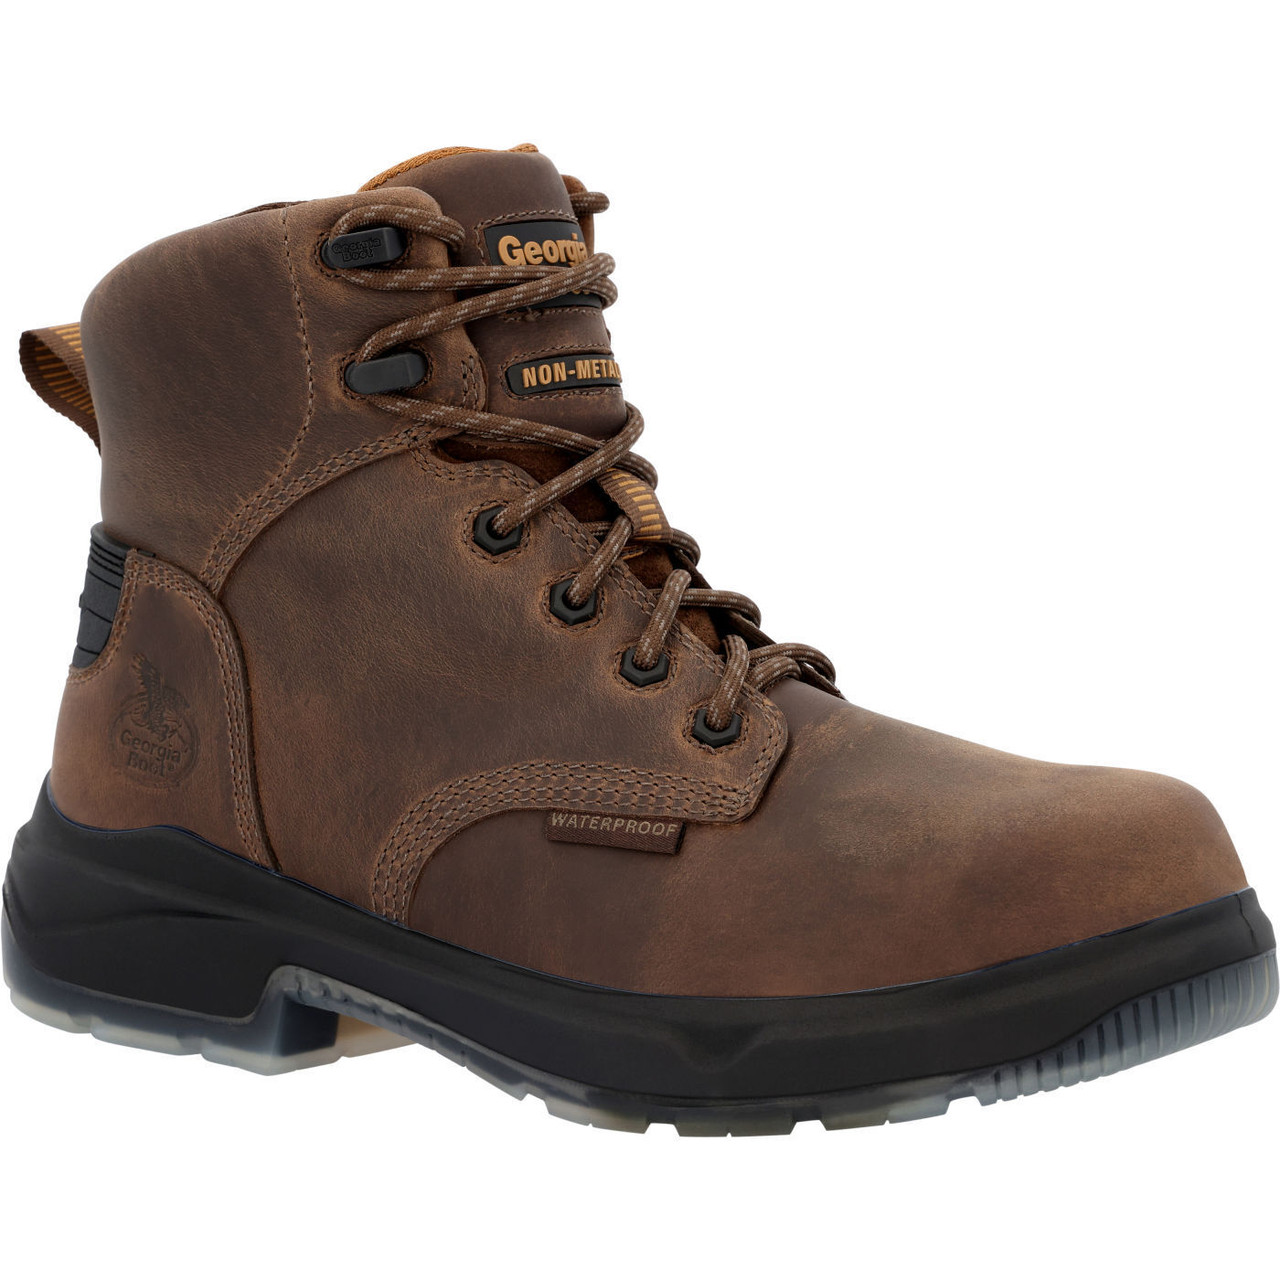 GEORGIA FLXPOINT ULTRA COMPOSITE TOE WATERPROOF WORK BOOTS GB00552